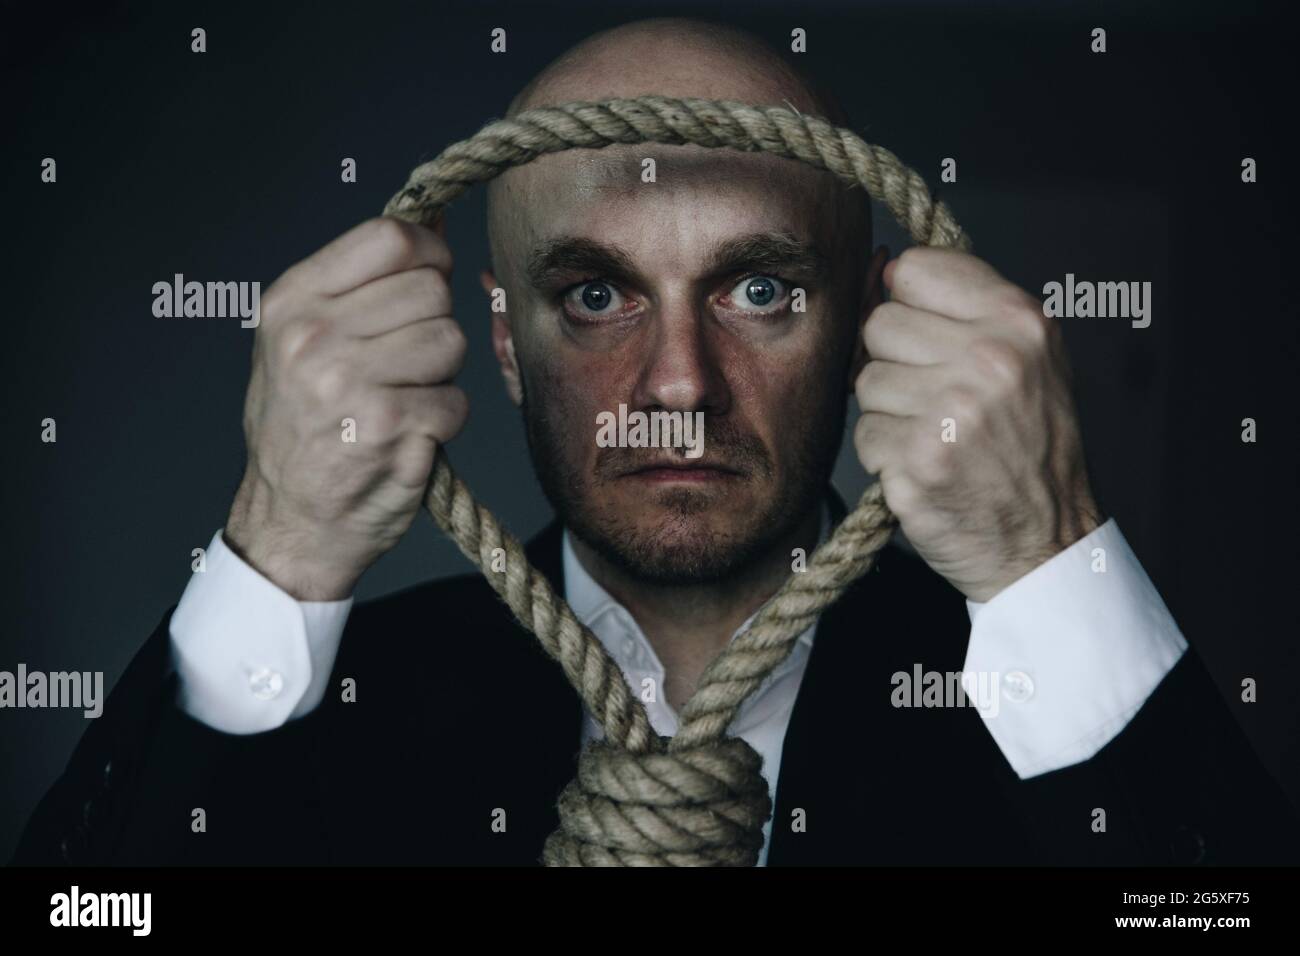 Businessman committing suicide through hanging. Last decision. Stock Photo